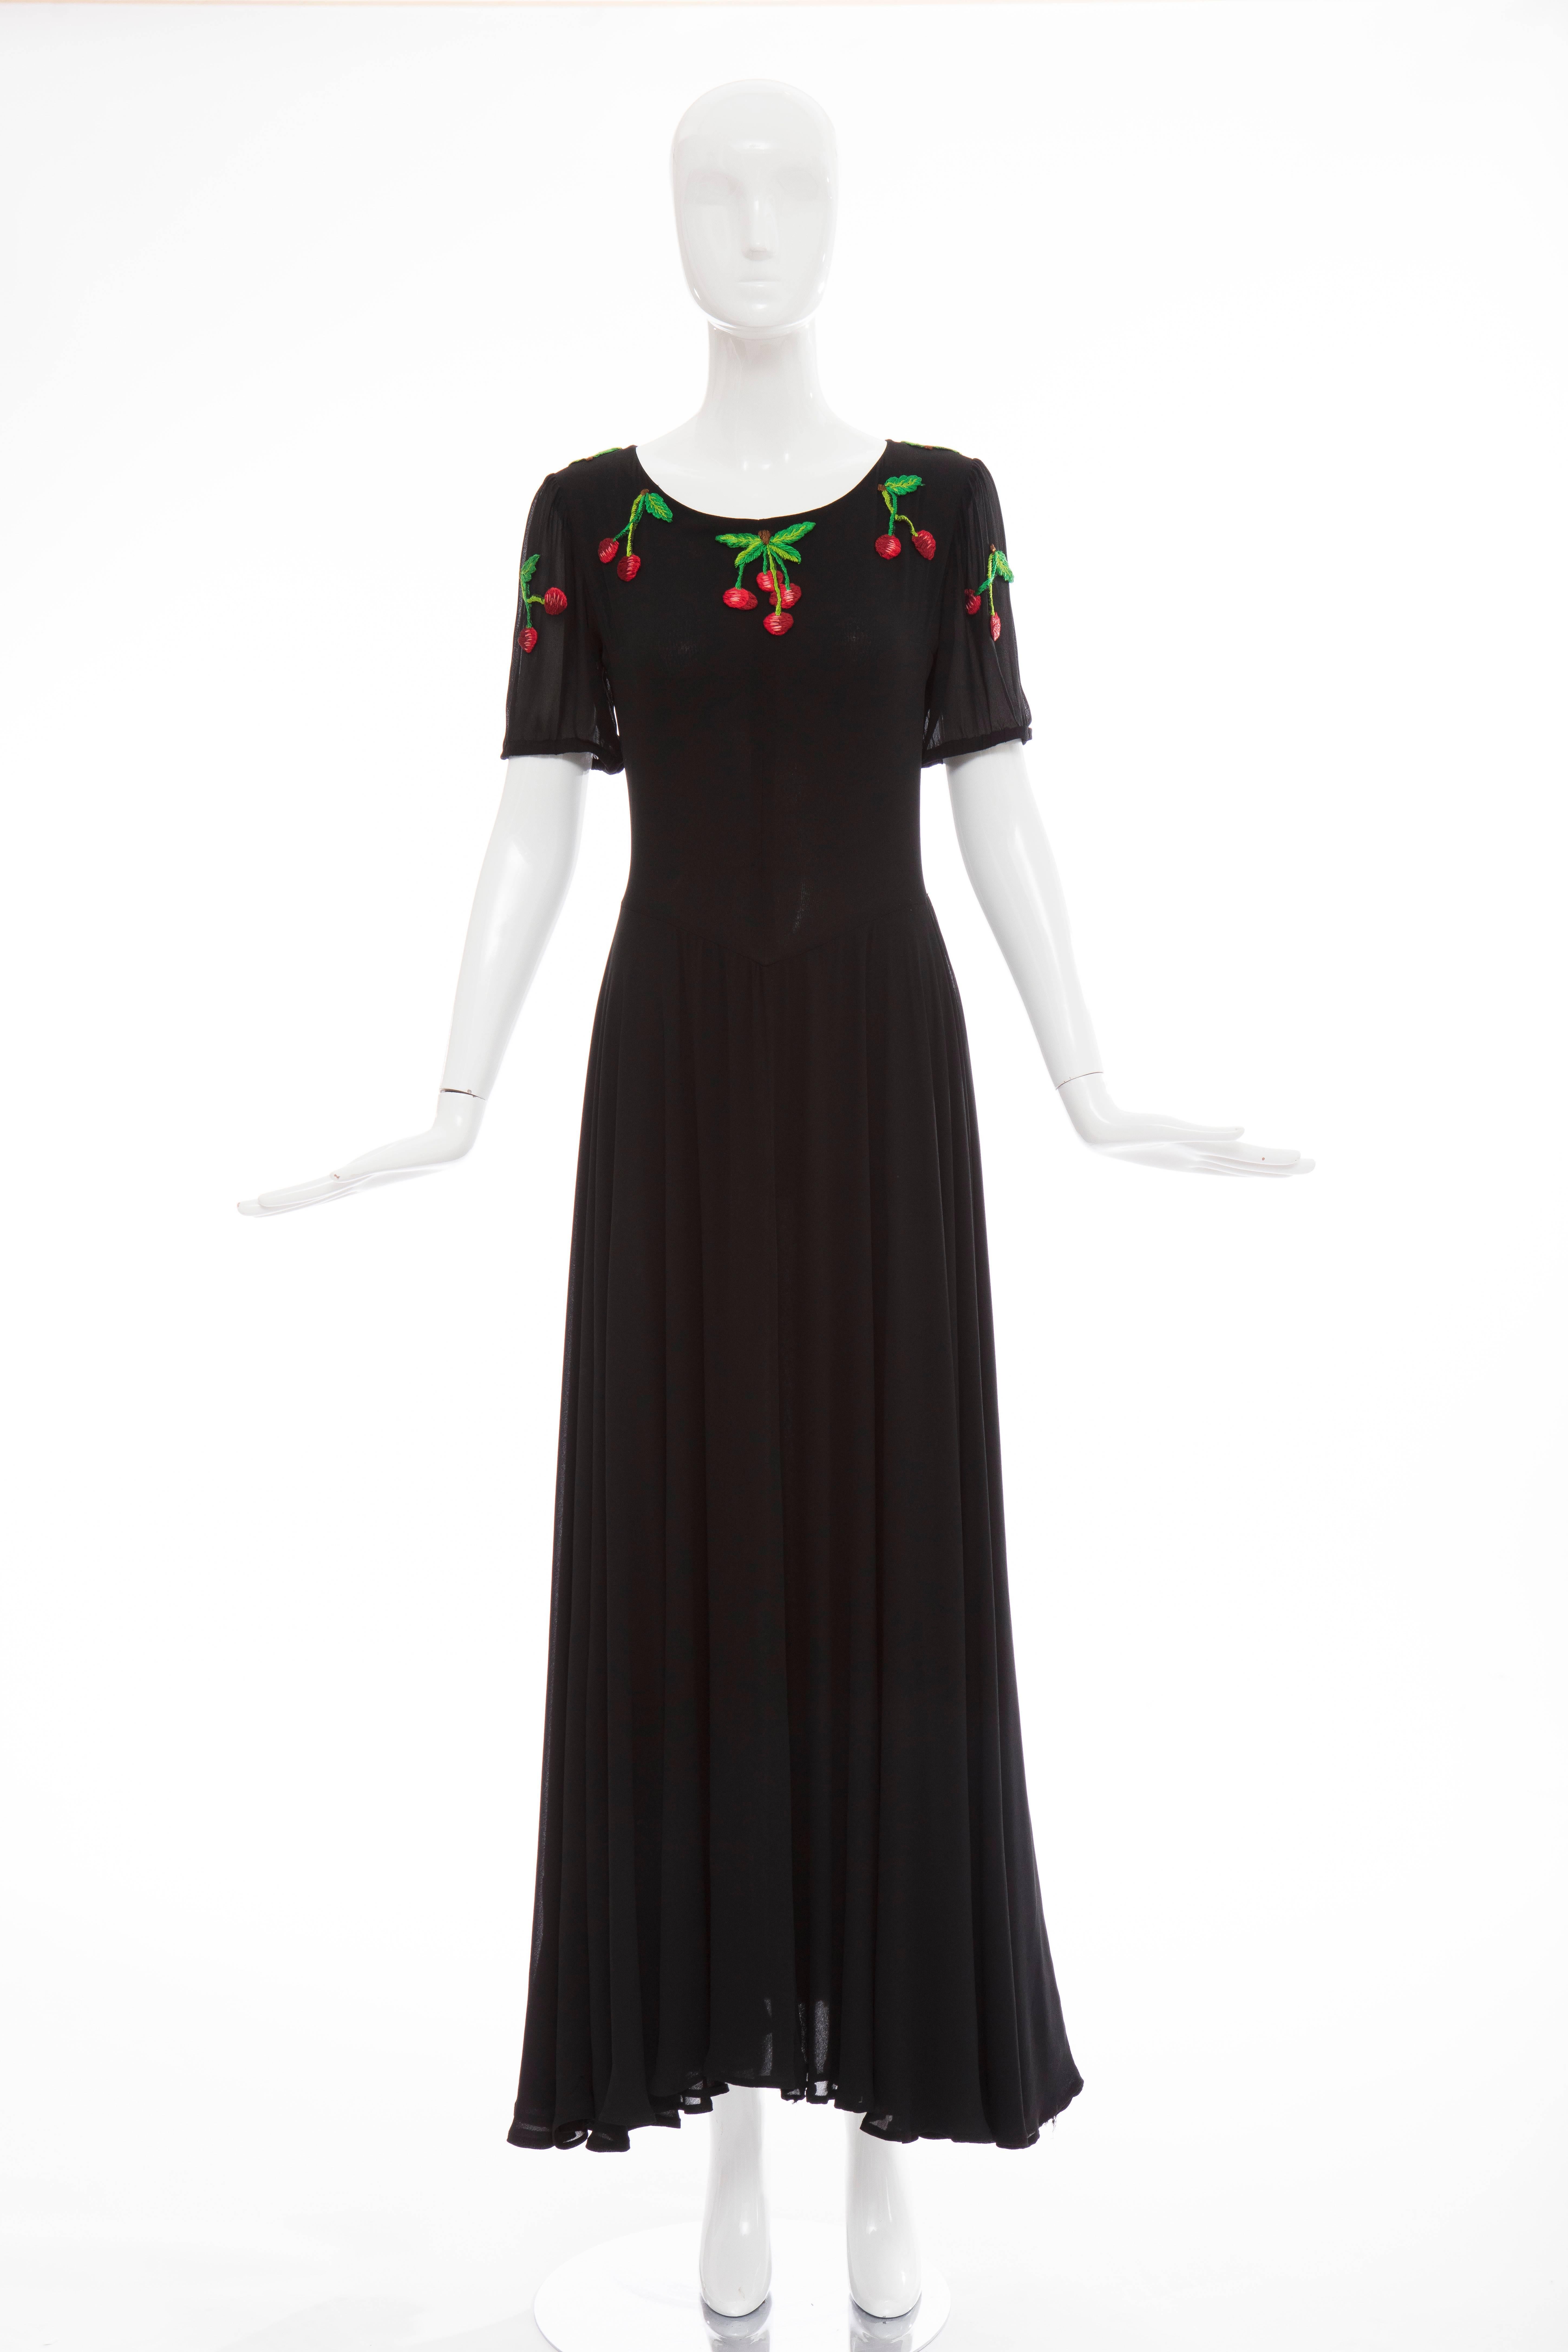 Valentino, Circa 1970's black rayon crepe hand embroidered cherries evening dress with jewel neckline, back zip and fully lined.

Label: Size 8, Modern size 

Bust 31, Waist 26, Hips 74, Length 56